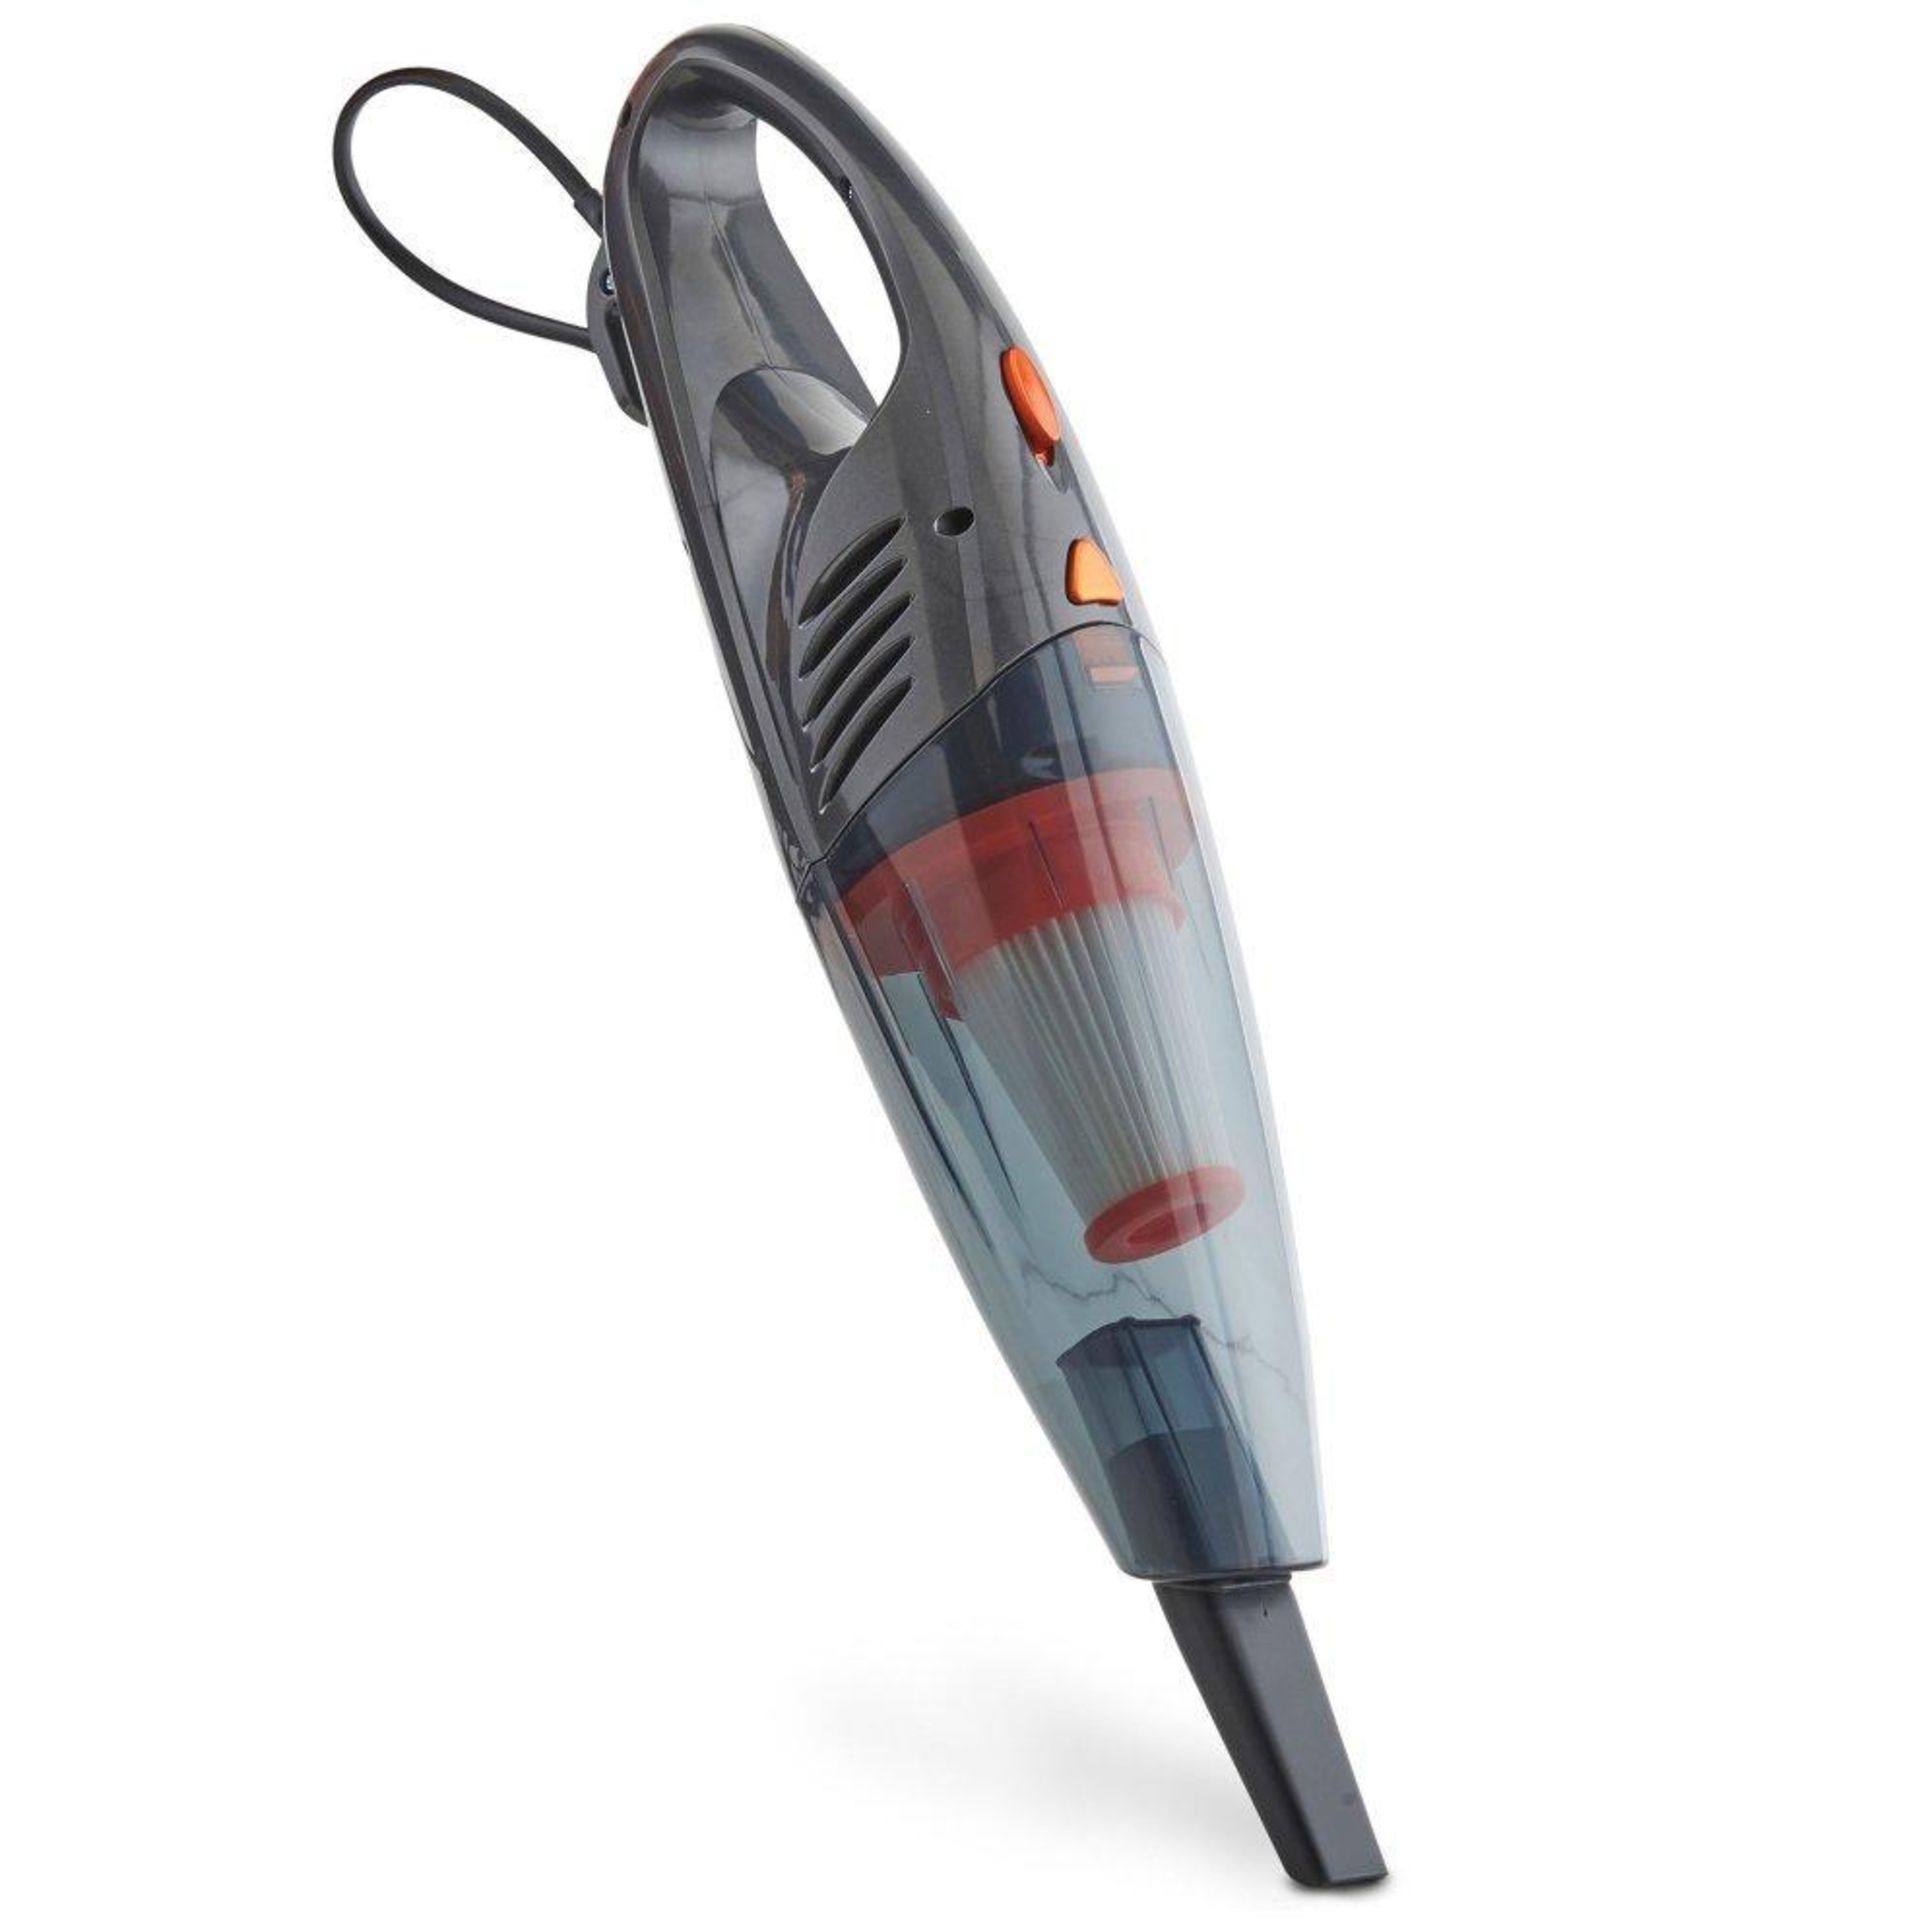 2 in 1 Stick Vacuum 600W - Grey Luxury 2 in 1 Stick VacuumDonâ€™t struggle with large, heavy - Image 6 of 6